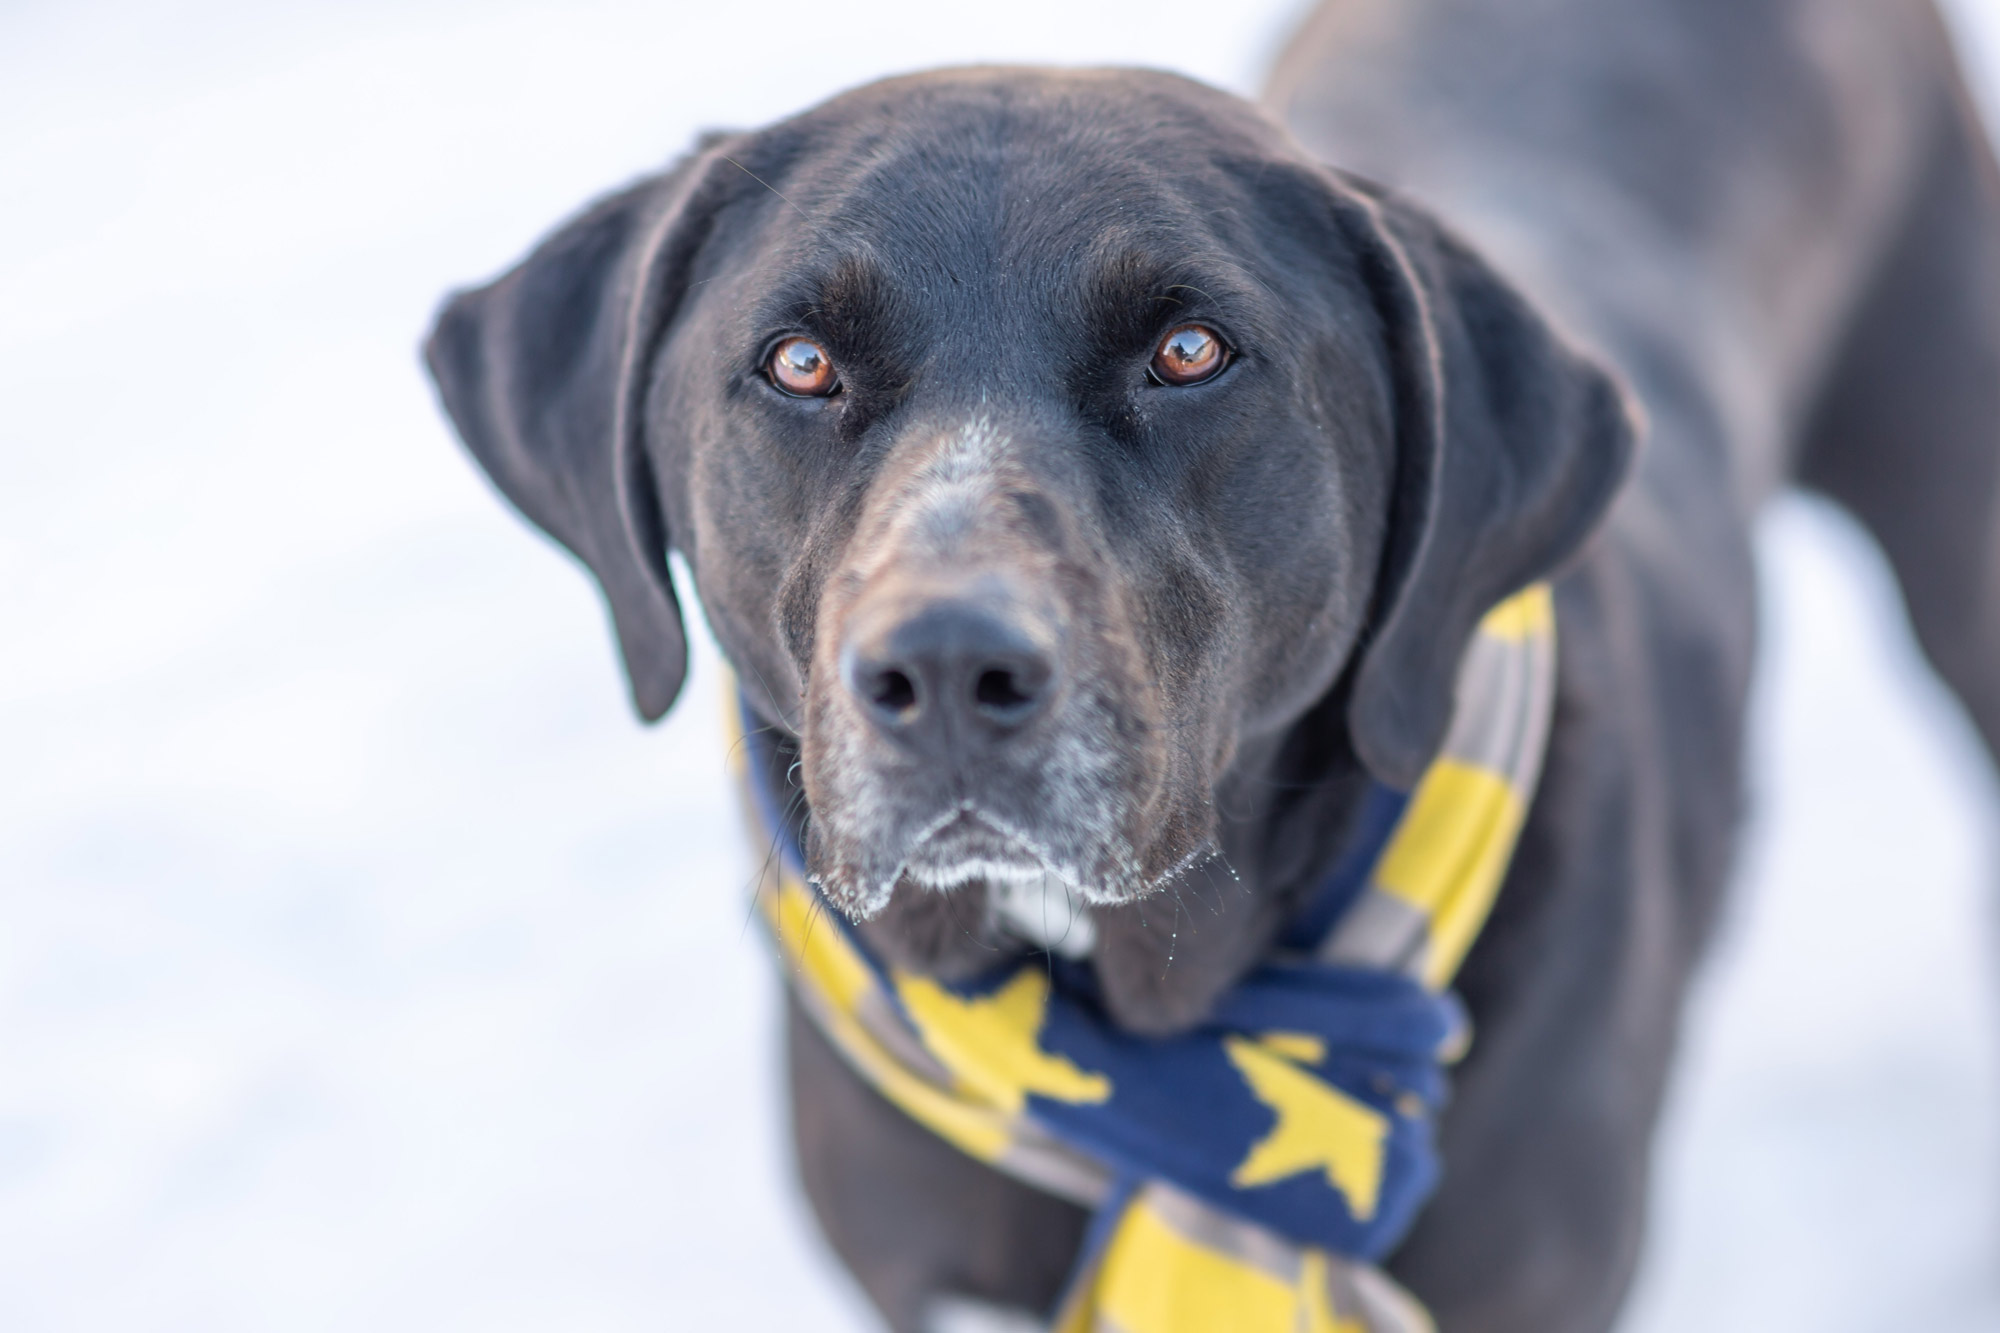 A chocolate lab wearing a blue and yellow scarf with light snow on its jowels, looking up at the camera with clear brown eyes